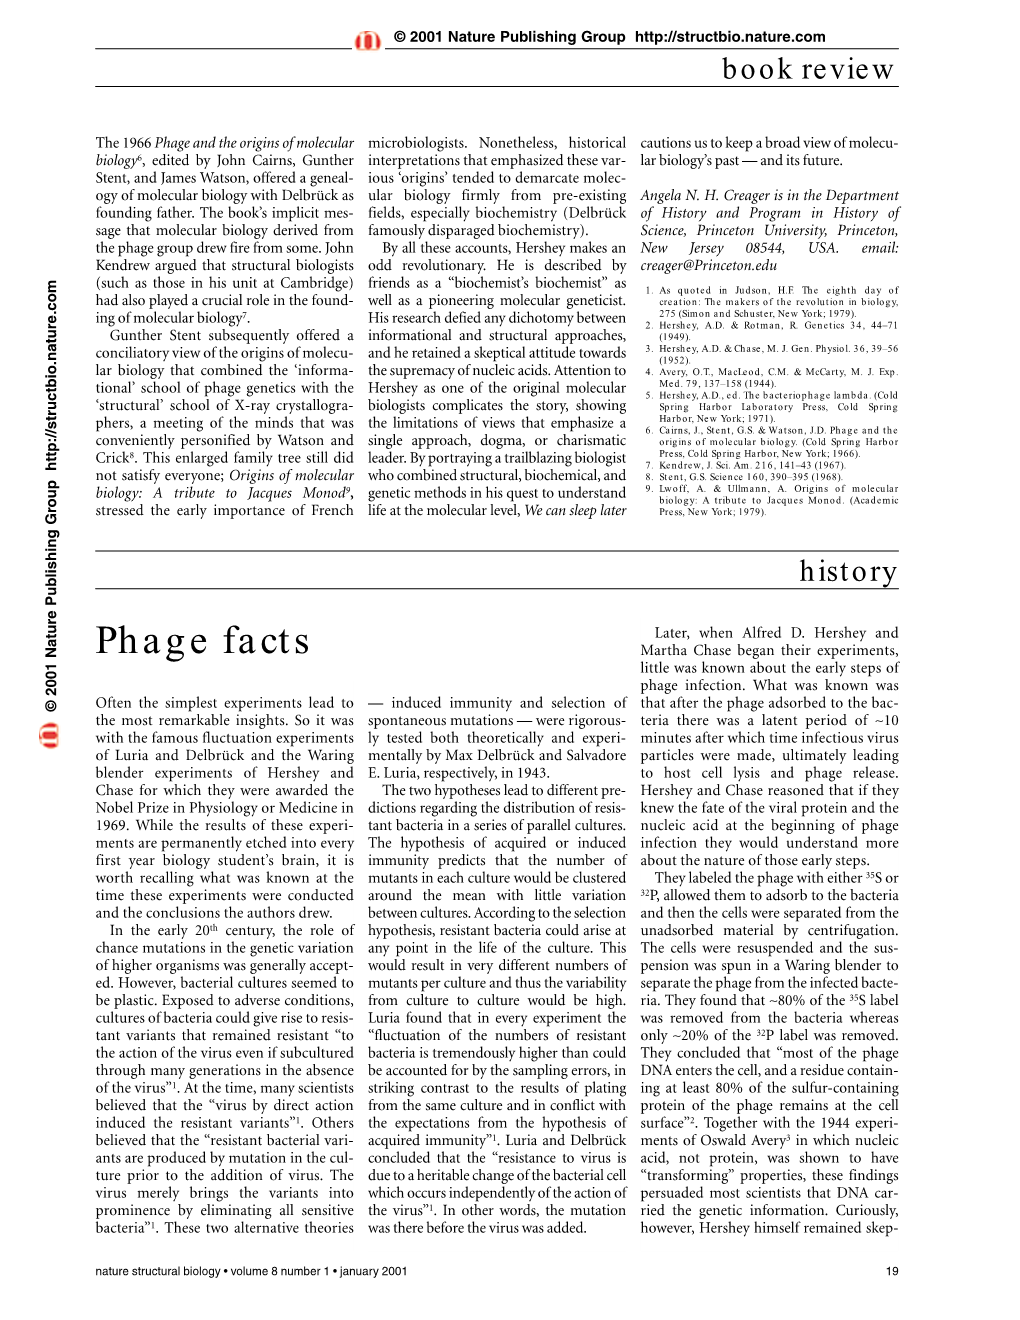 Phage Facts Martha Chase Began Their Experiments, Little Was Known About the Early Steps of Phage Infection